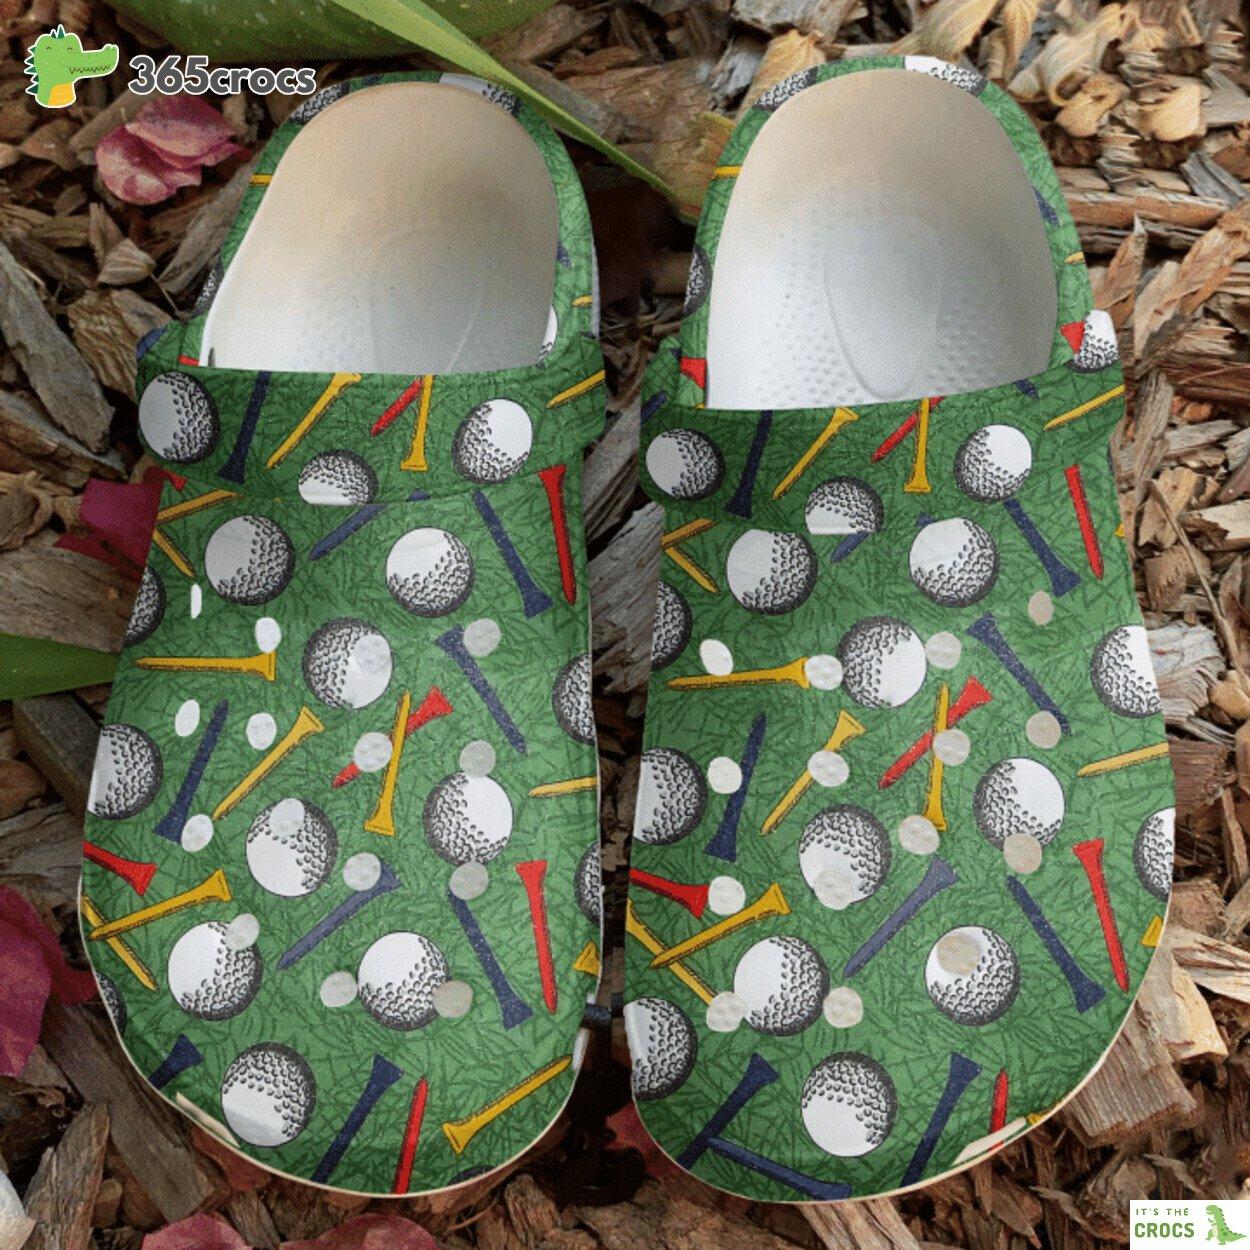 Golf Lovers Rejoice With The Exclusive ParTee Time Clog Shoe Design